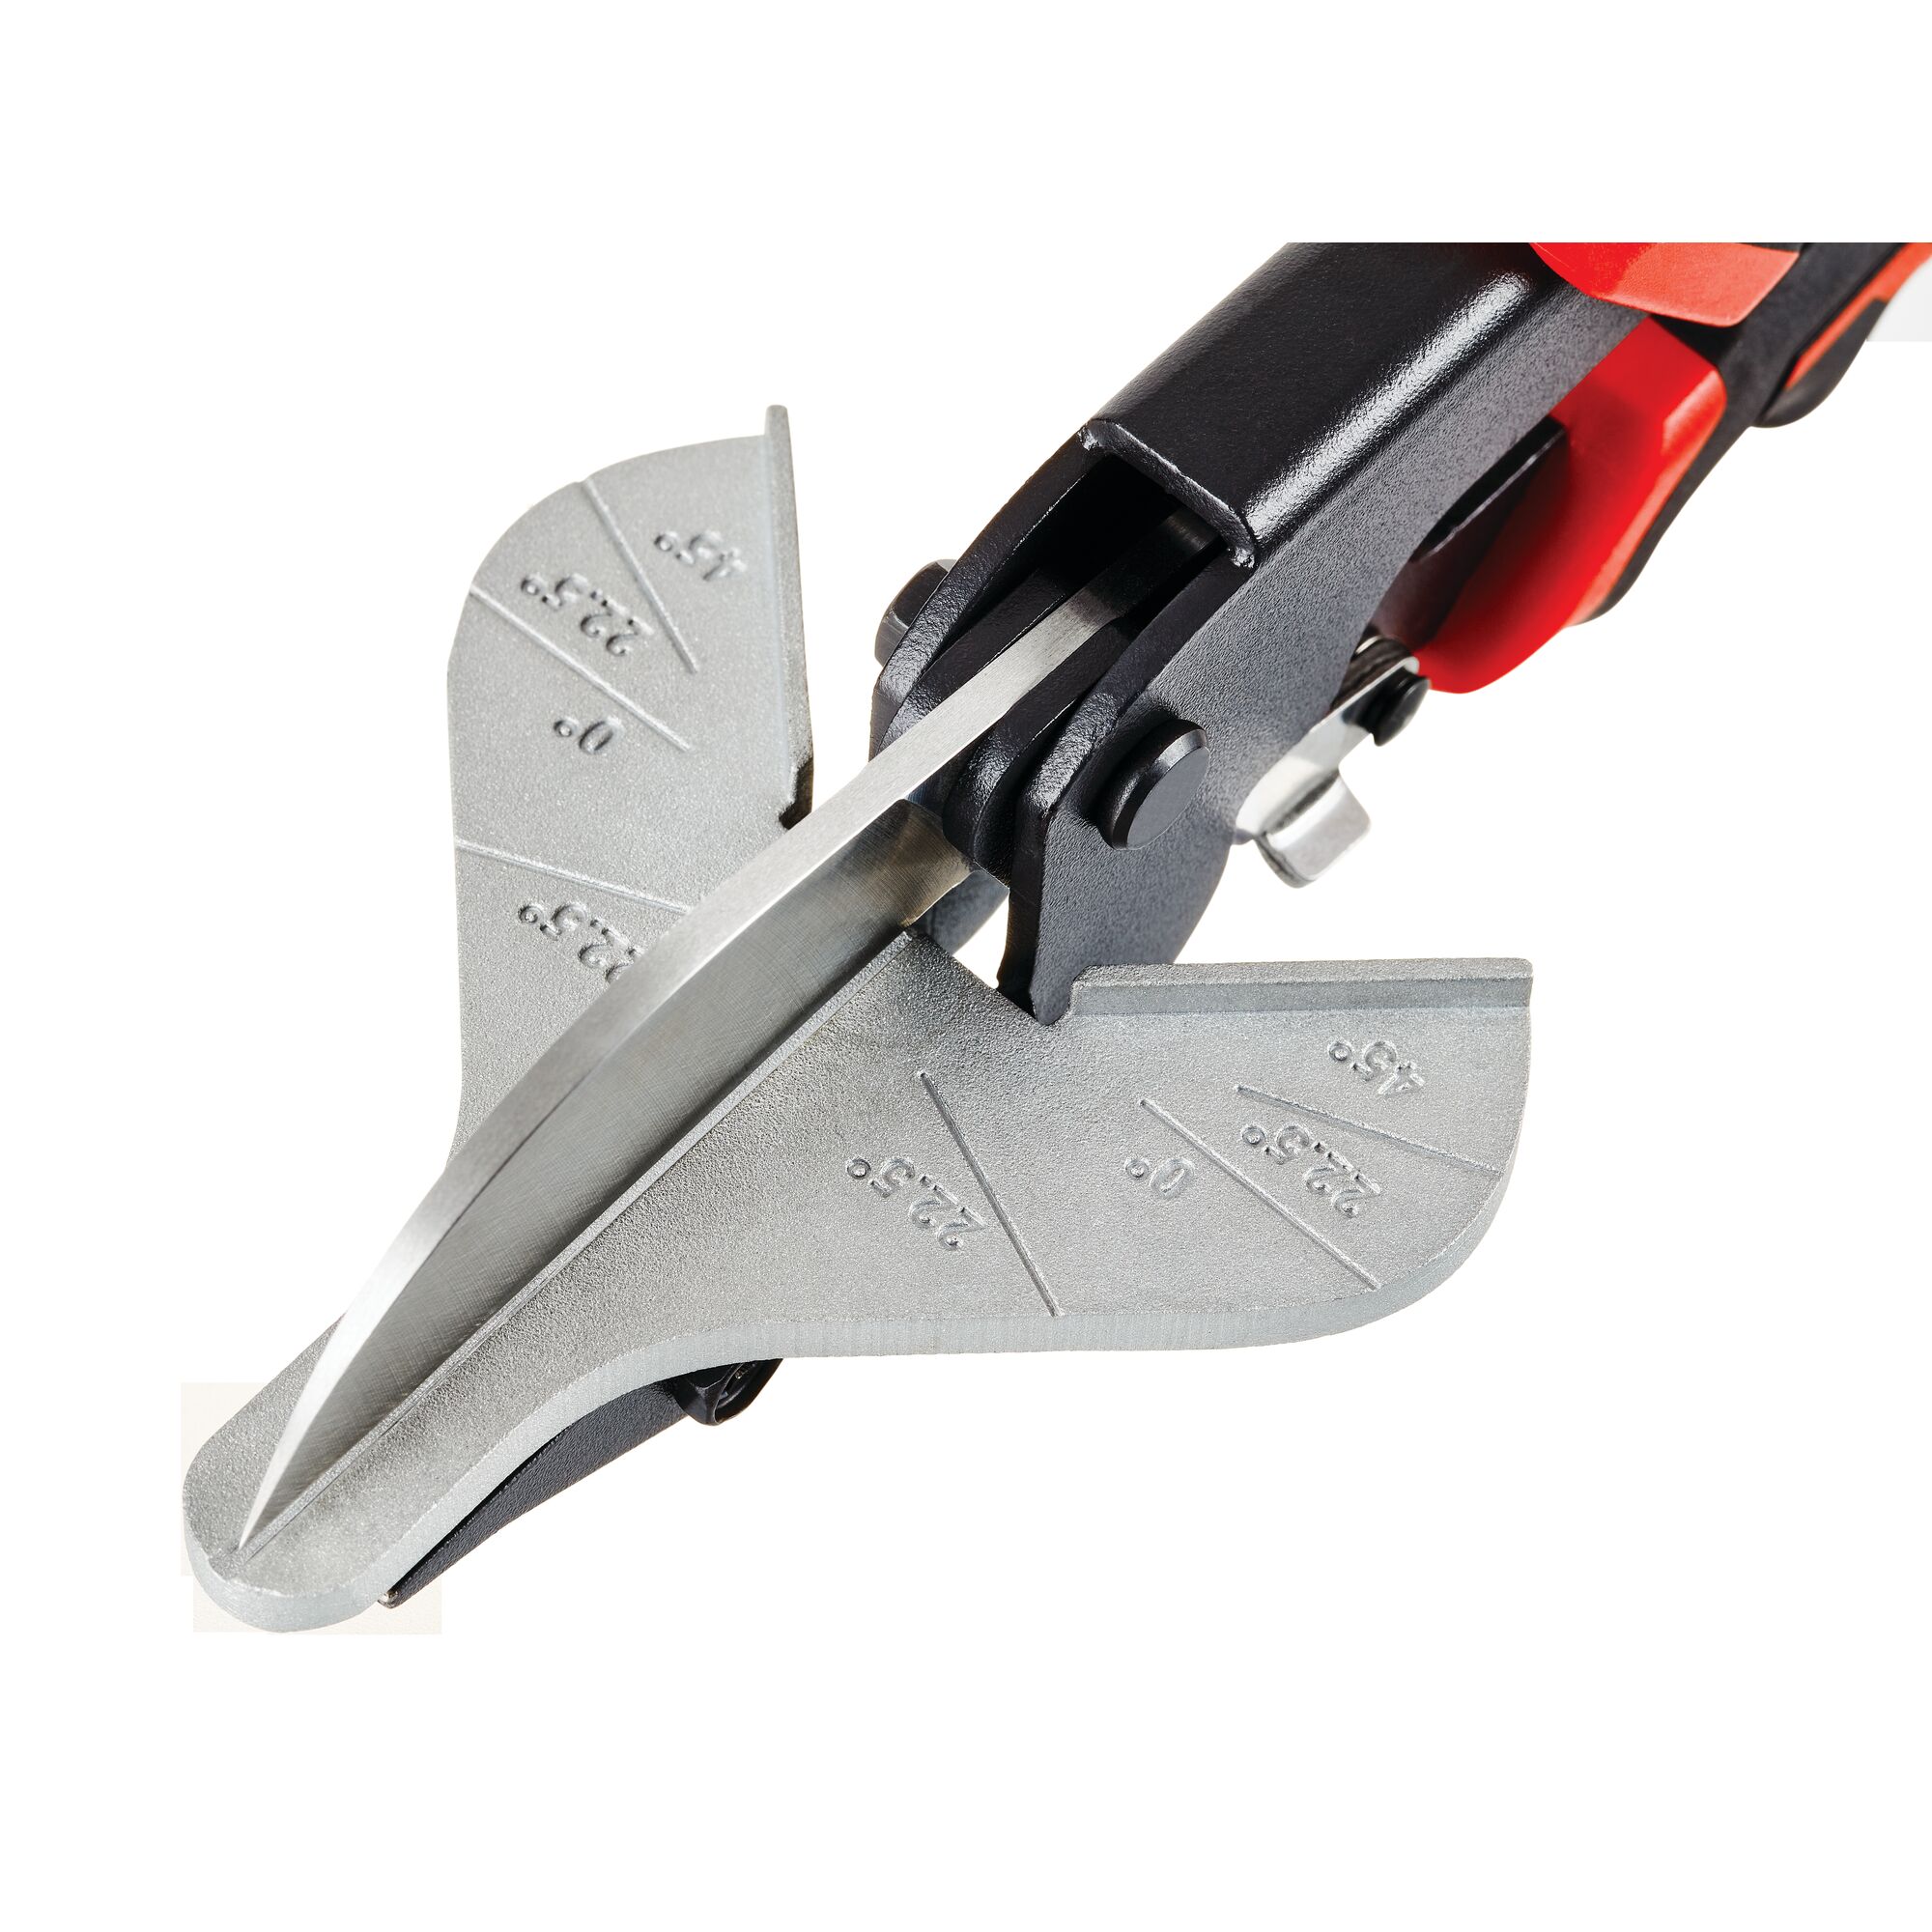 View of CRAFTSMAN Snips highlighting product features